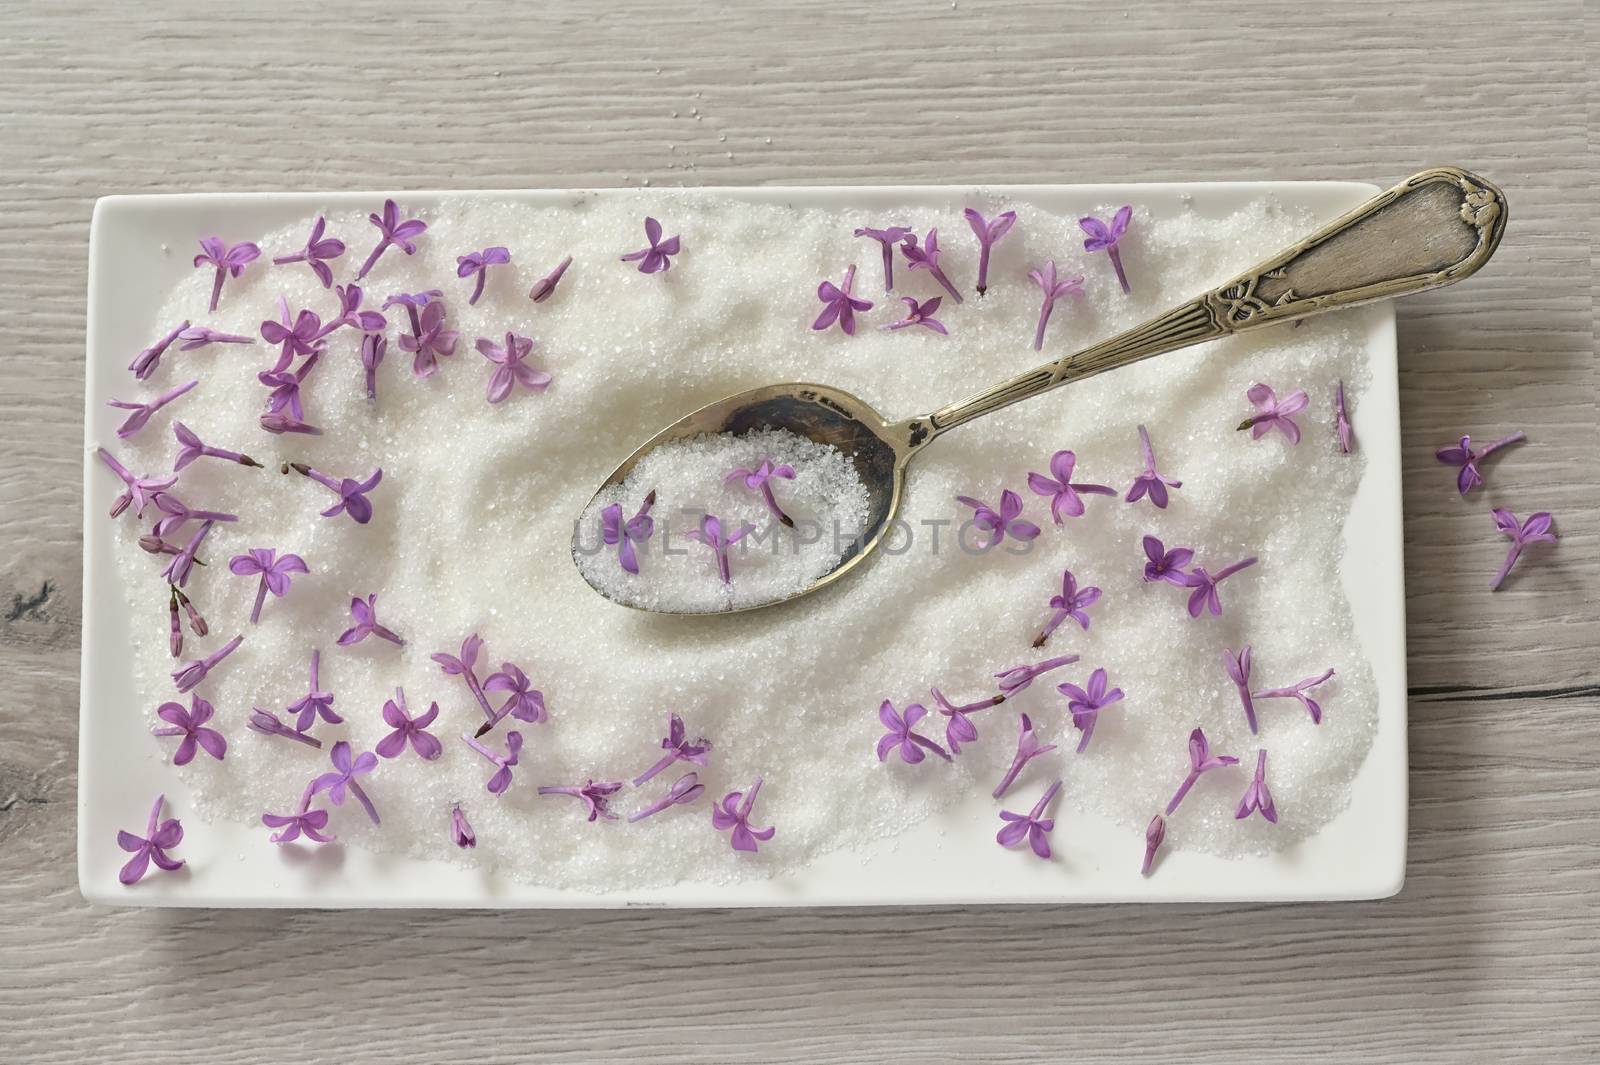 Lilac Sugar In Spoon On WoodenTable by mady70